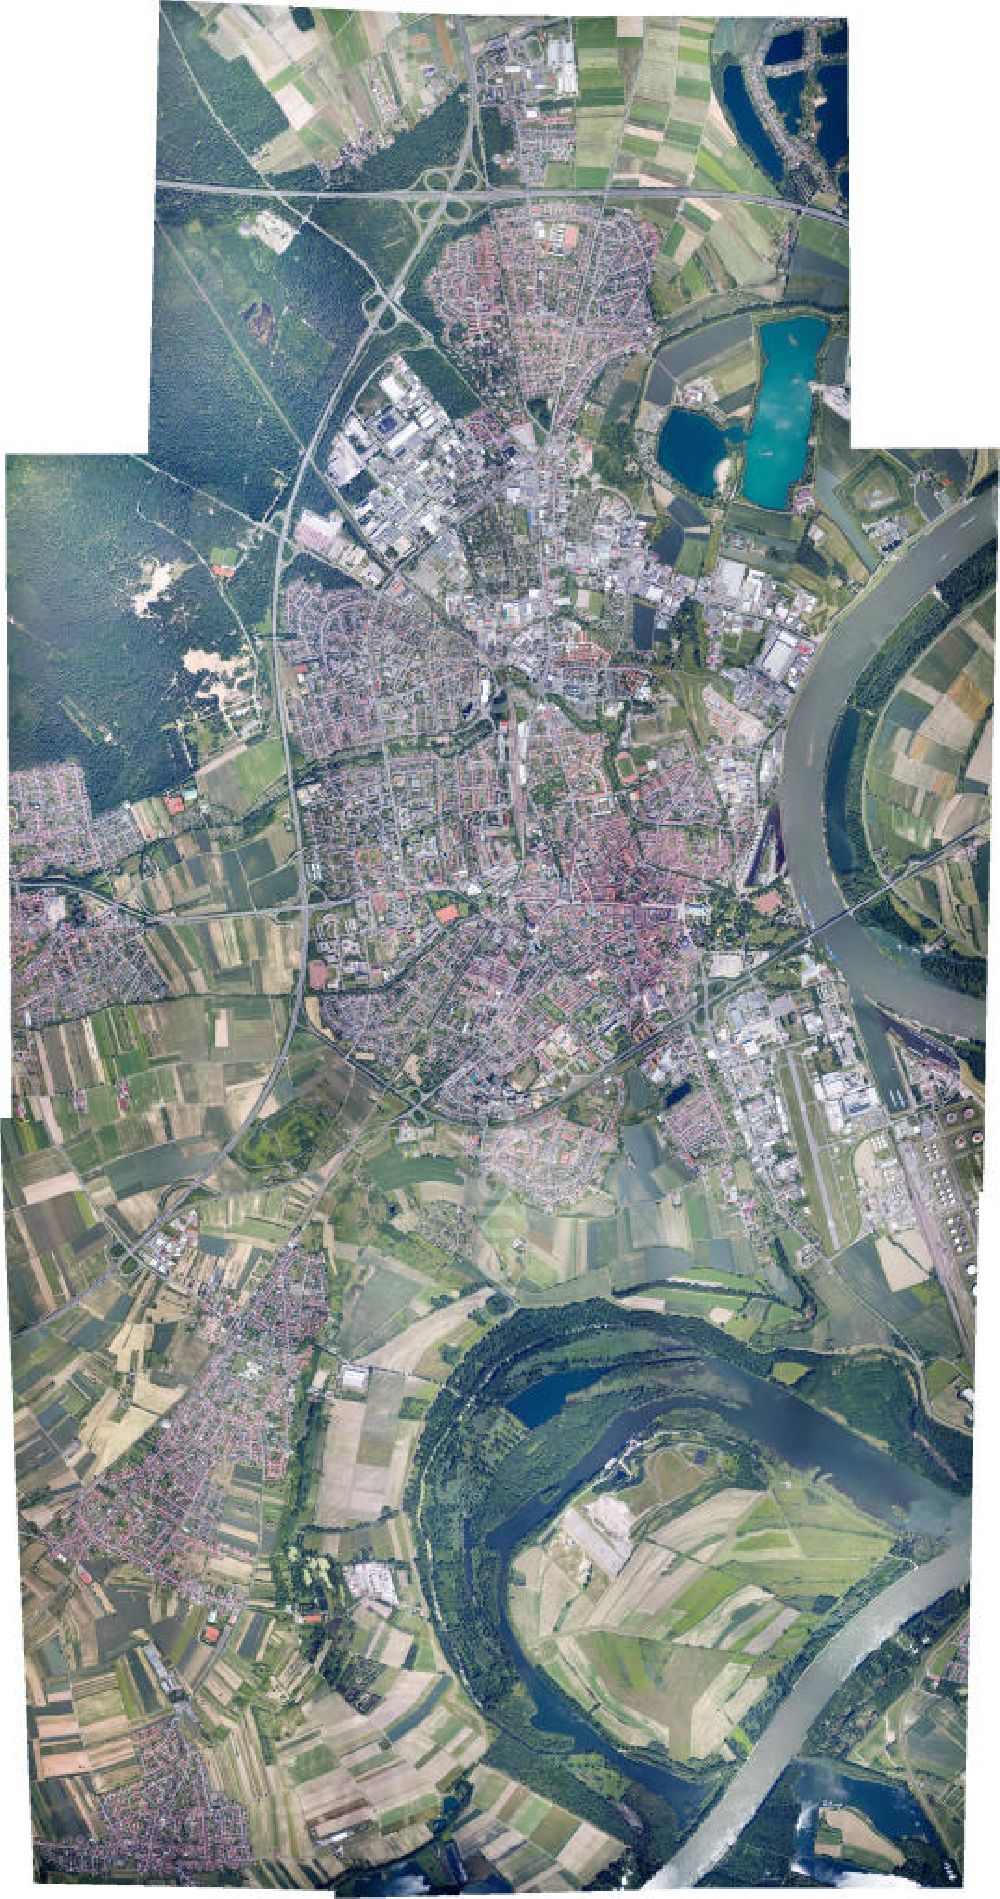 Vertical aerial photograph Speyer - Vertical aerial photograph of the city of Speyer with the surrounding places Dudenhofen, Römerberg Mechtersheim, Rinkenbergerhof in Rhineland-Palatinate. In the satellite view of the history of the federal highway A61 / E31 and the B9